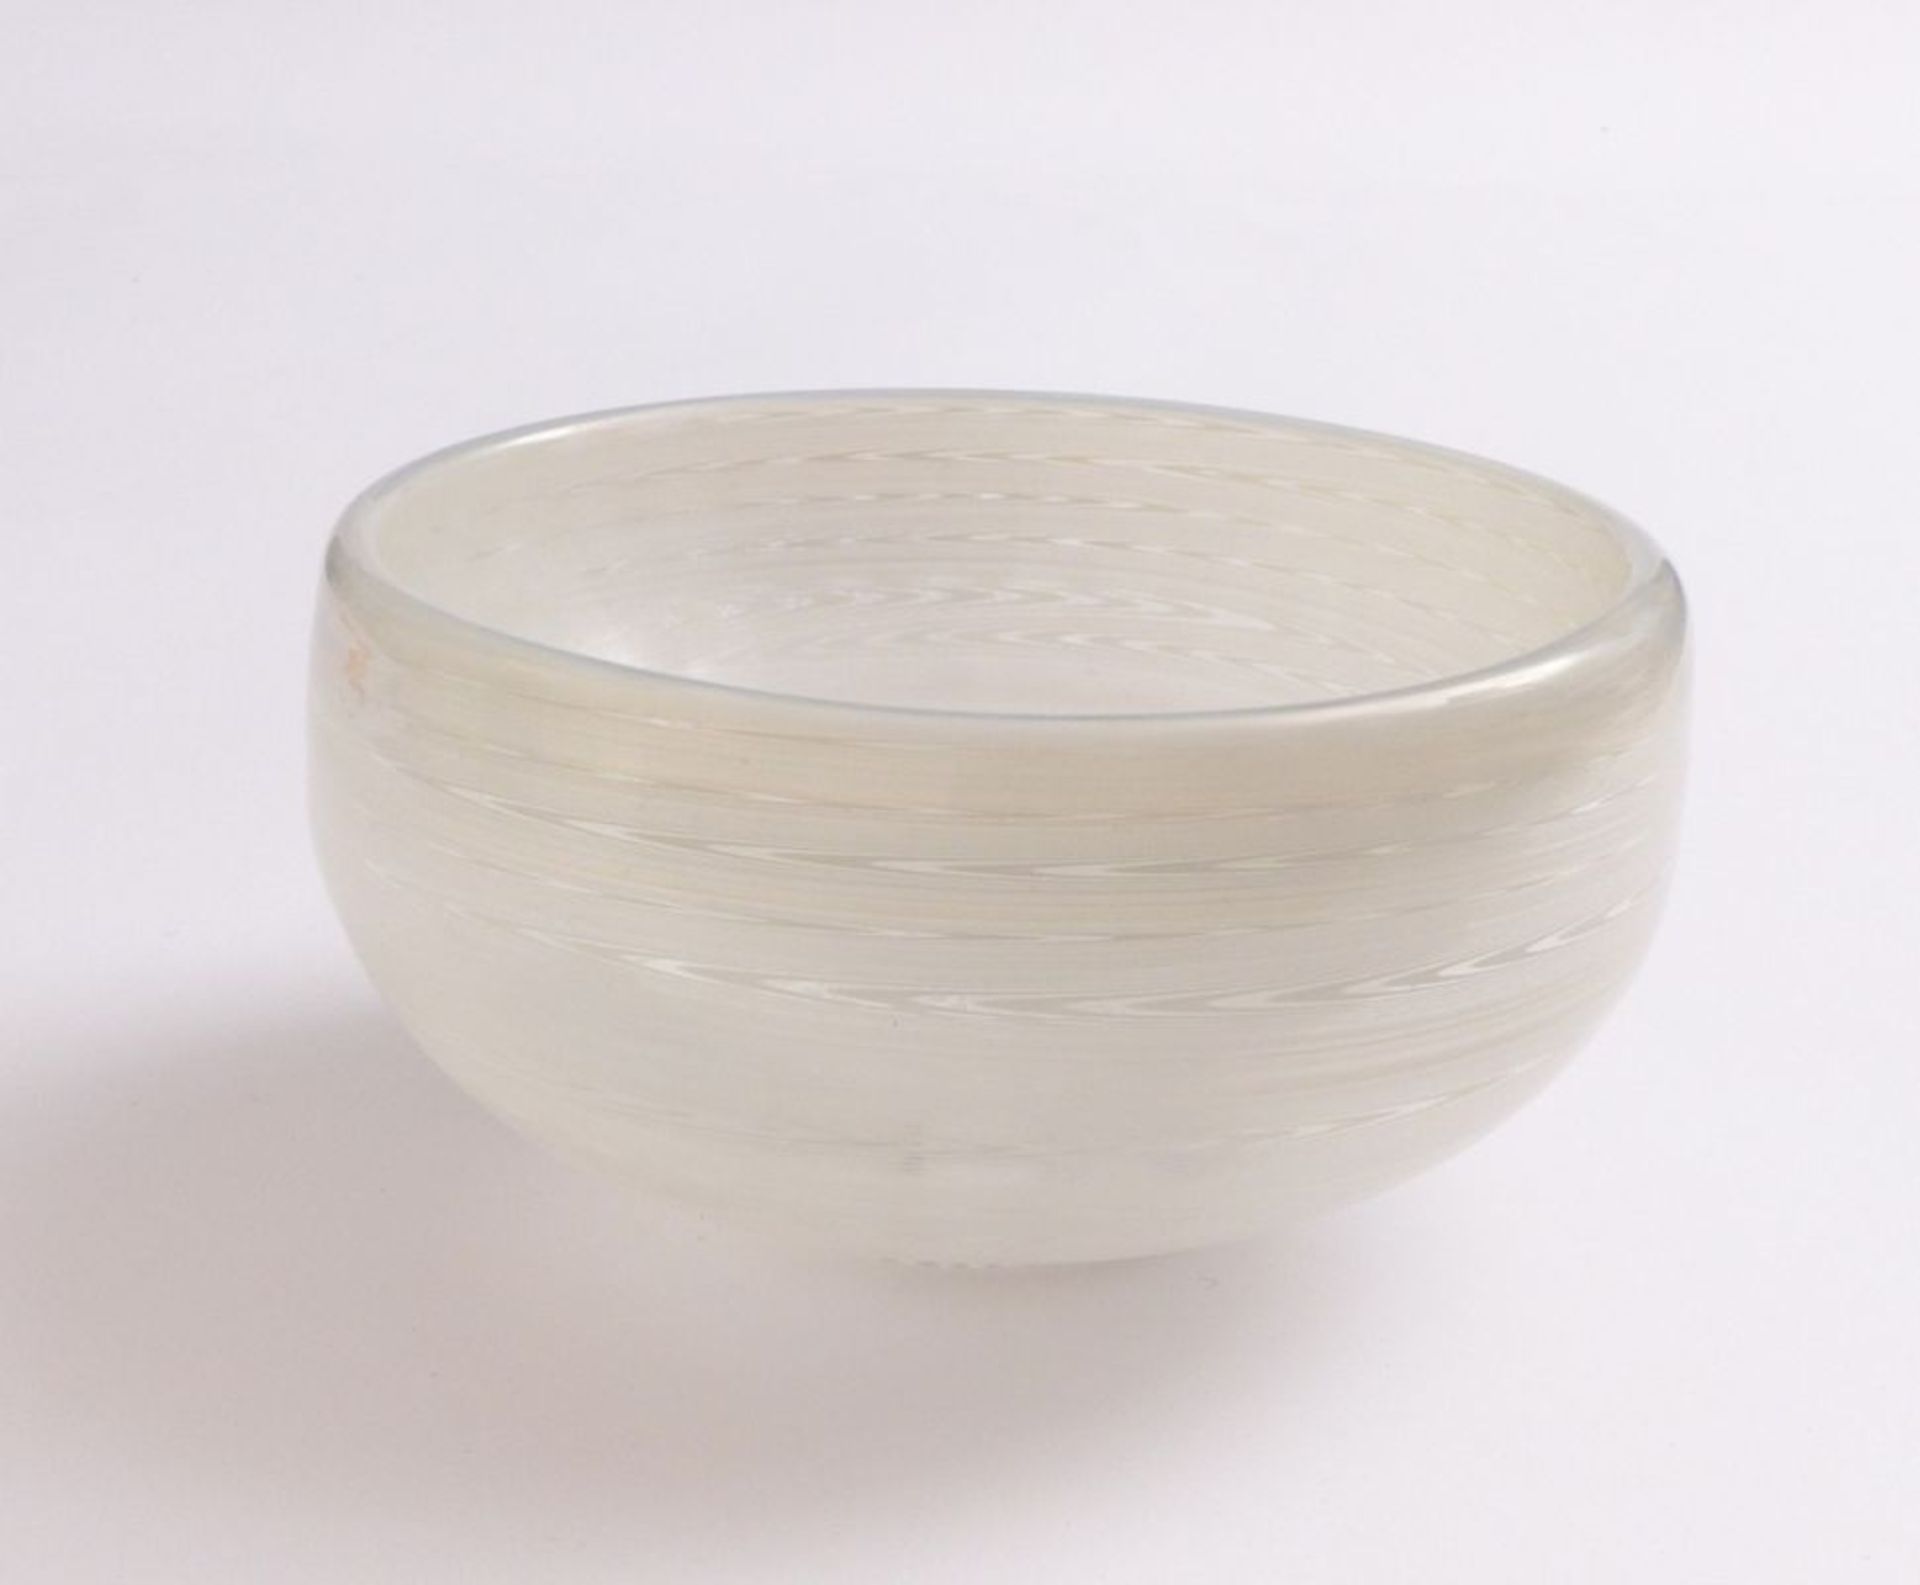 Knye, GünterDouble layered bowl(Lauscha 1936 born) Colorless glass with white threads. Monogrammed